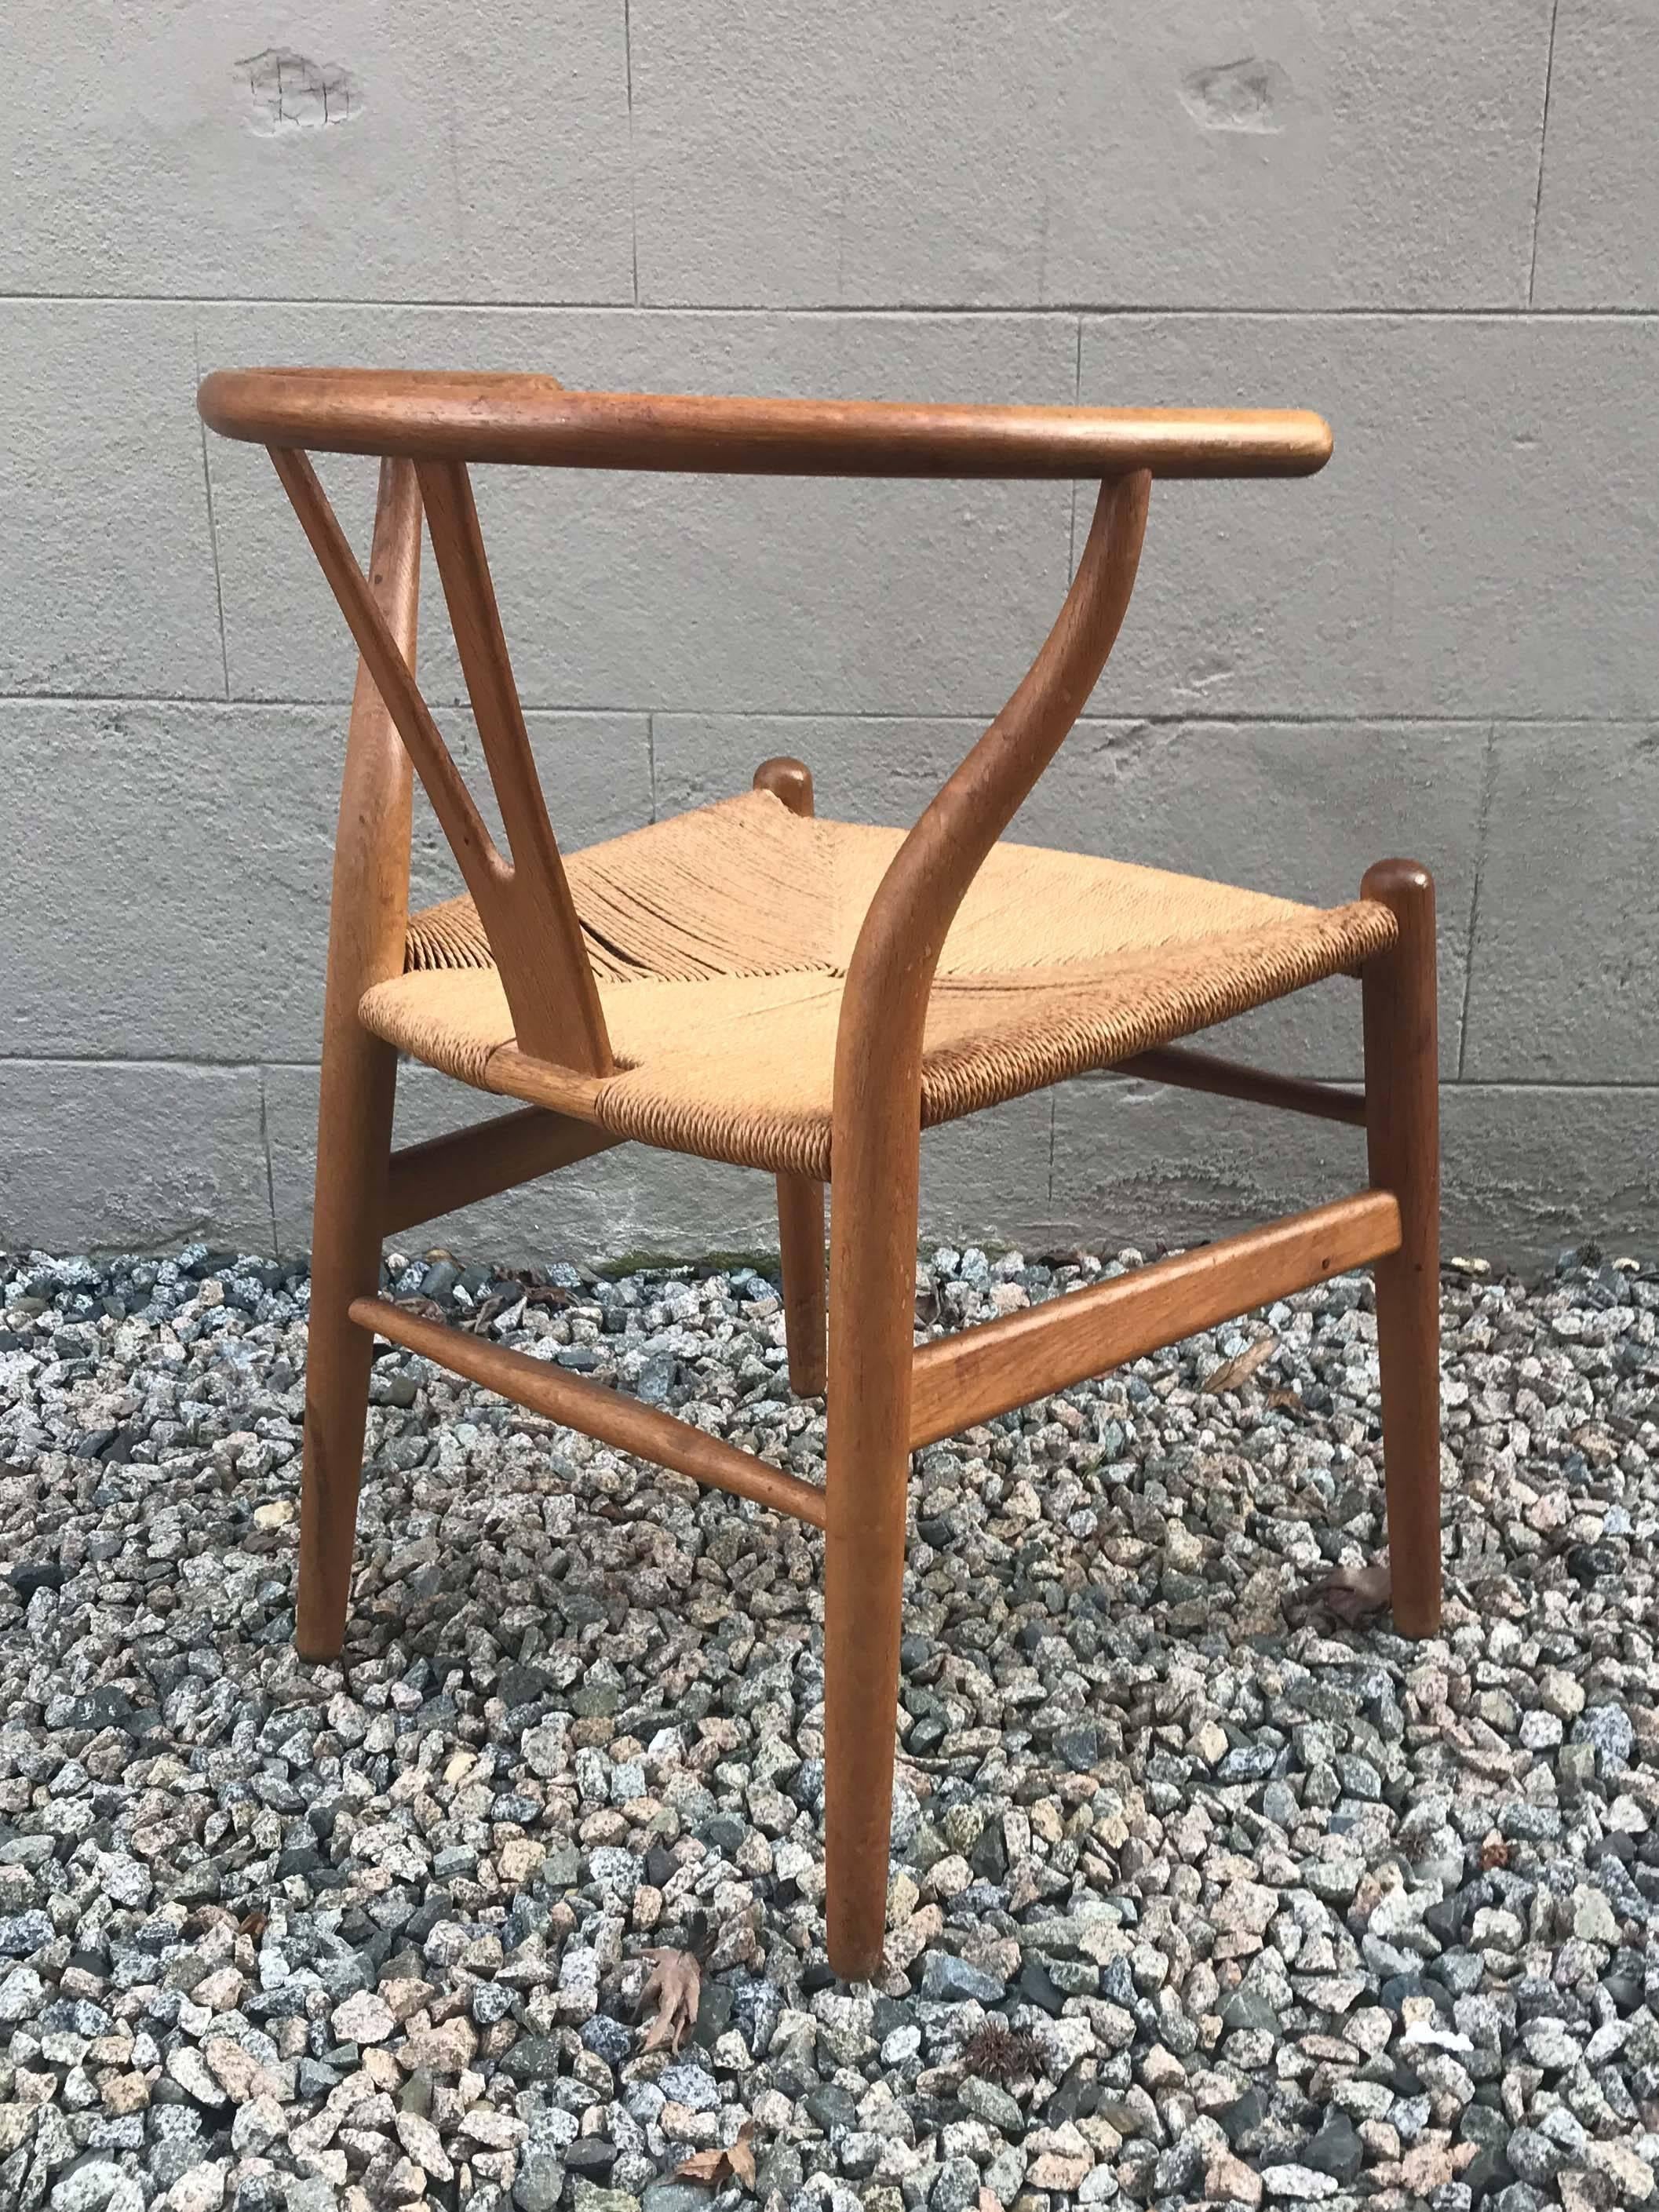 A set of six Hans J. Wegner CH-24 wishbone chairs in oak with woven cord seats. Very good vintage condition, minor wear consistent with age and use. Please note the minor spotting on the cord seats. Stamped with original labels attached to bottom.